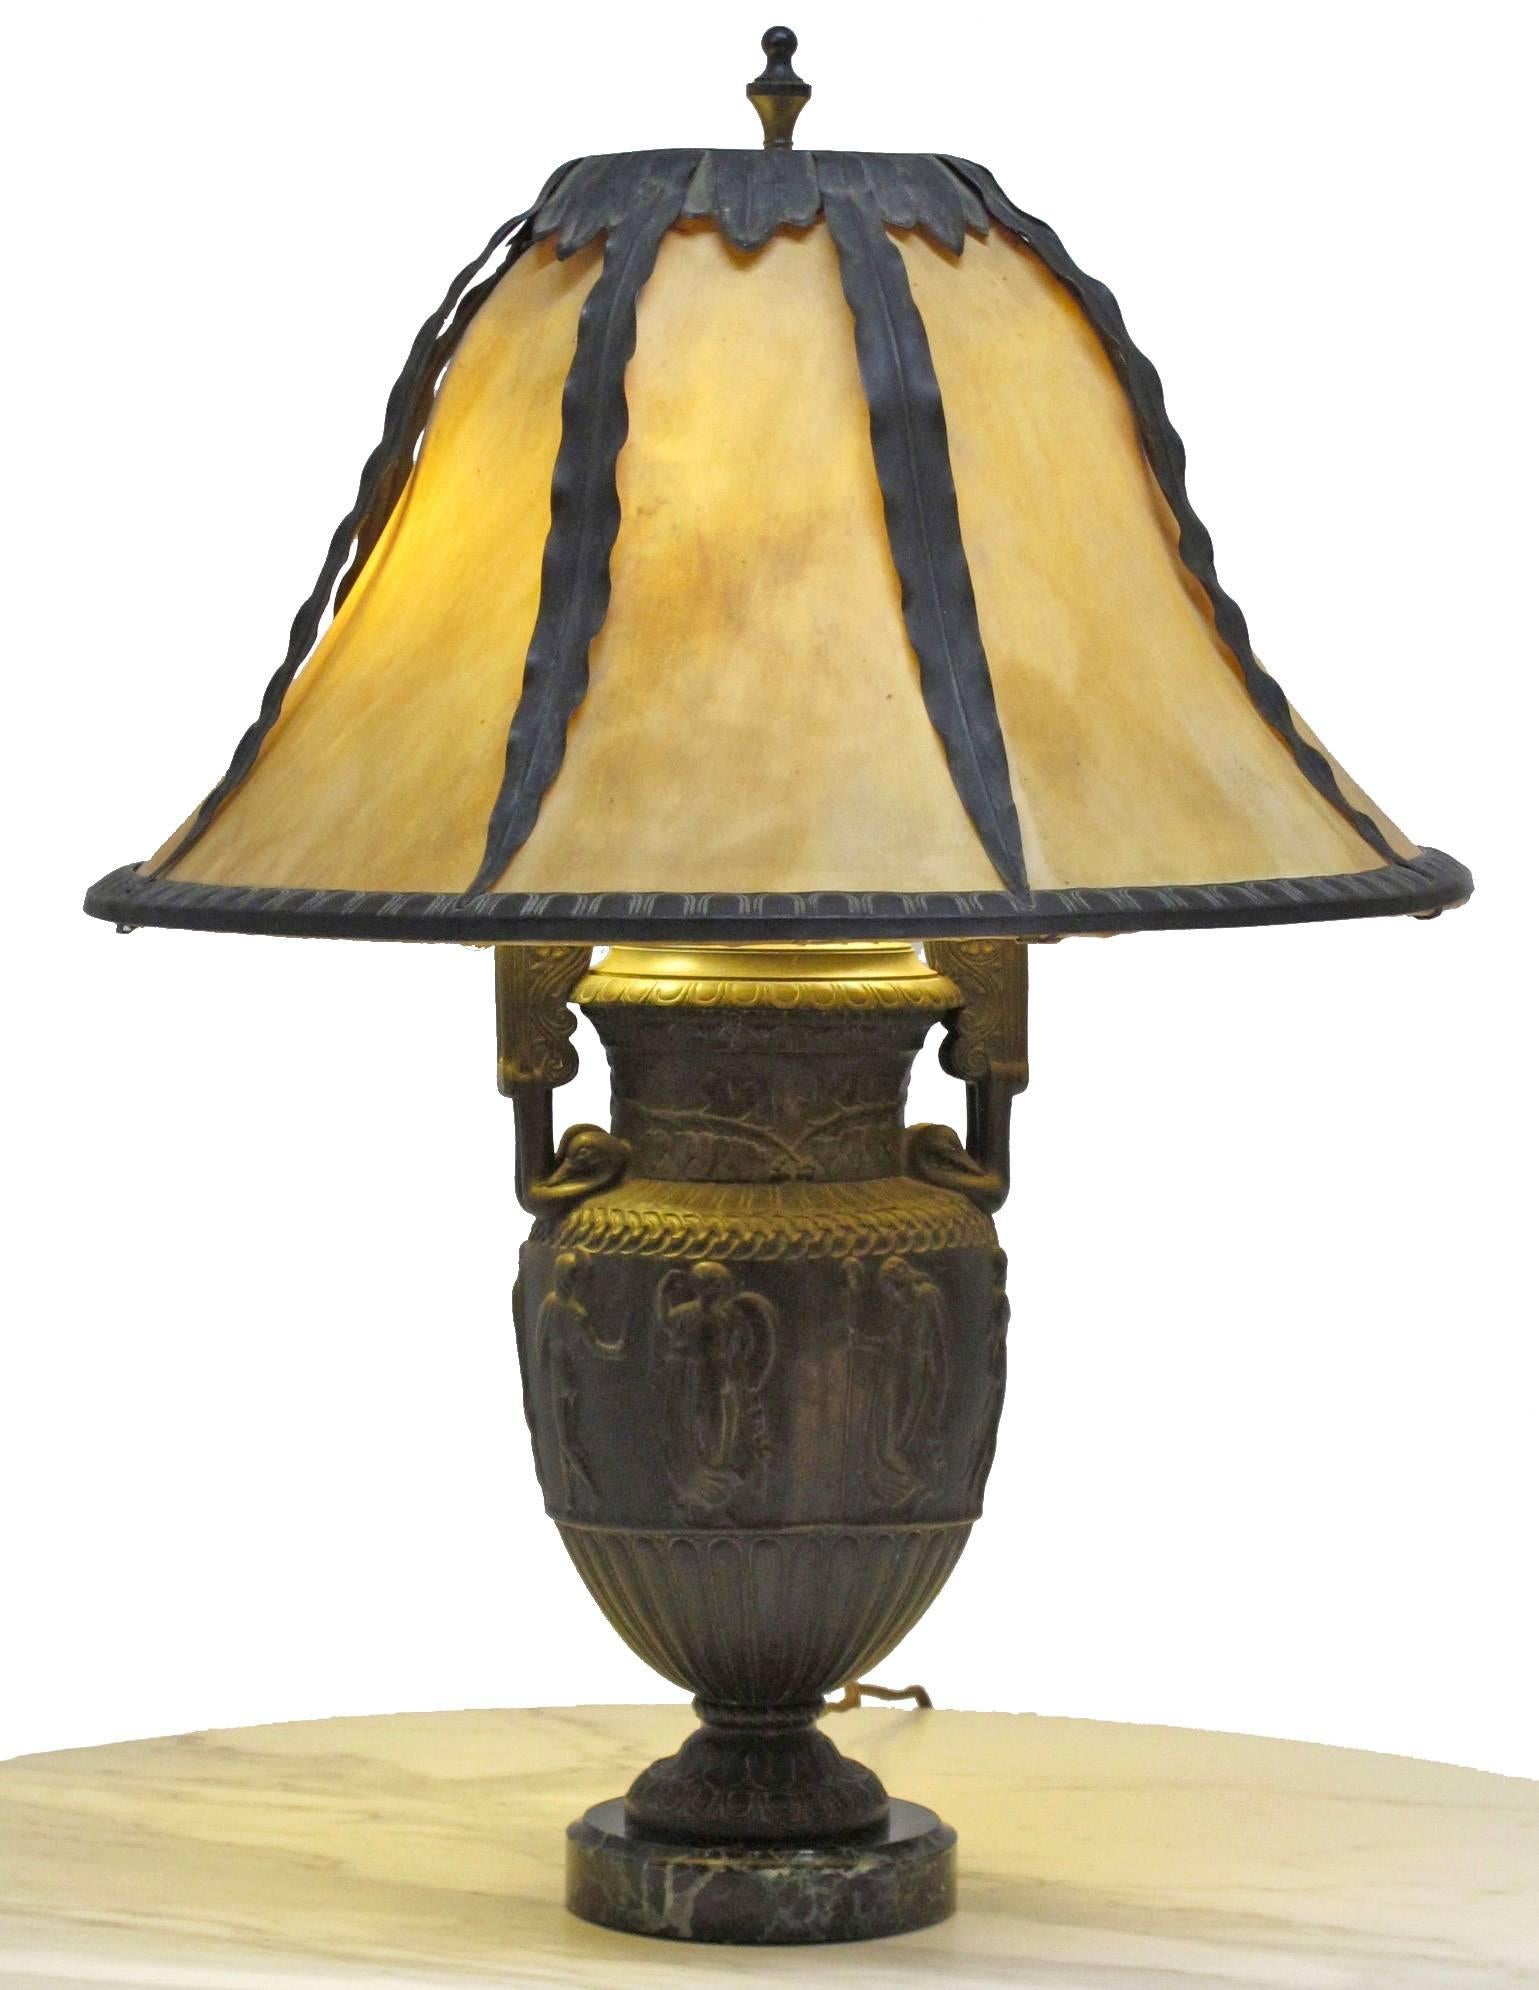 Neoclassical style repousse spelter urn on marble base with vellum shade. The 19th century urn was converted to a lamp in the early 20th century, the vellum shade having patinated copper trim and frame. Newly re-wired.